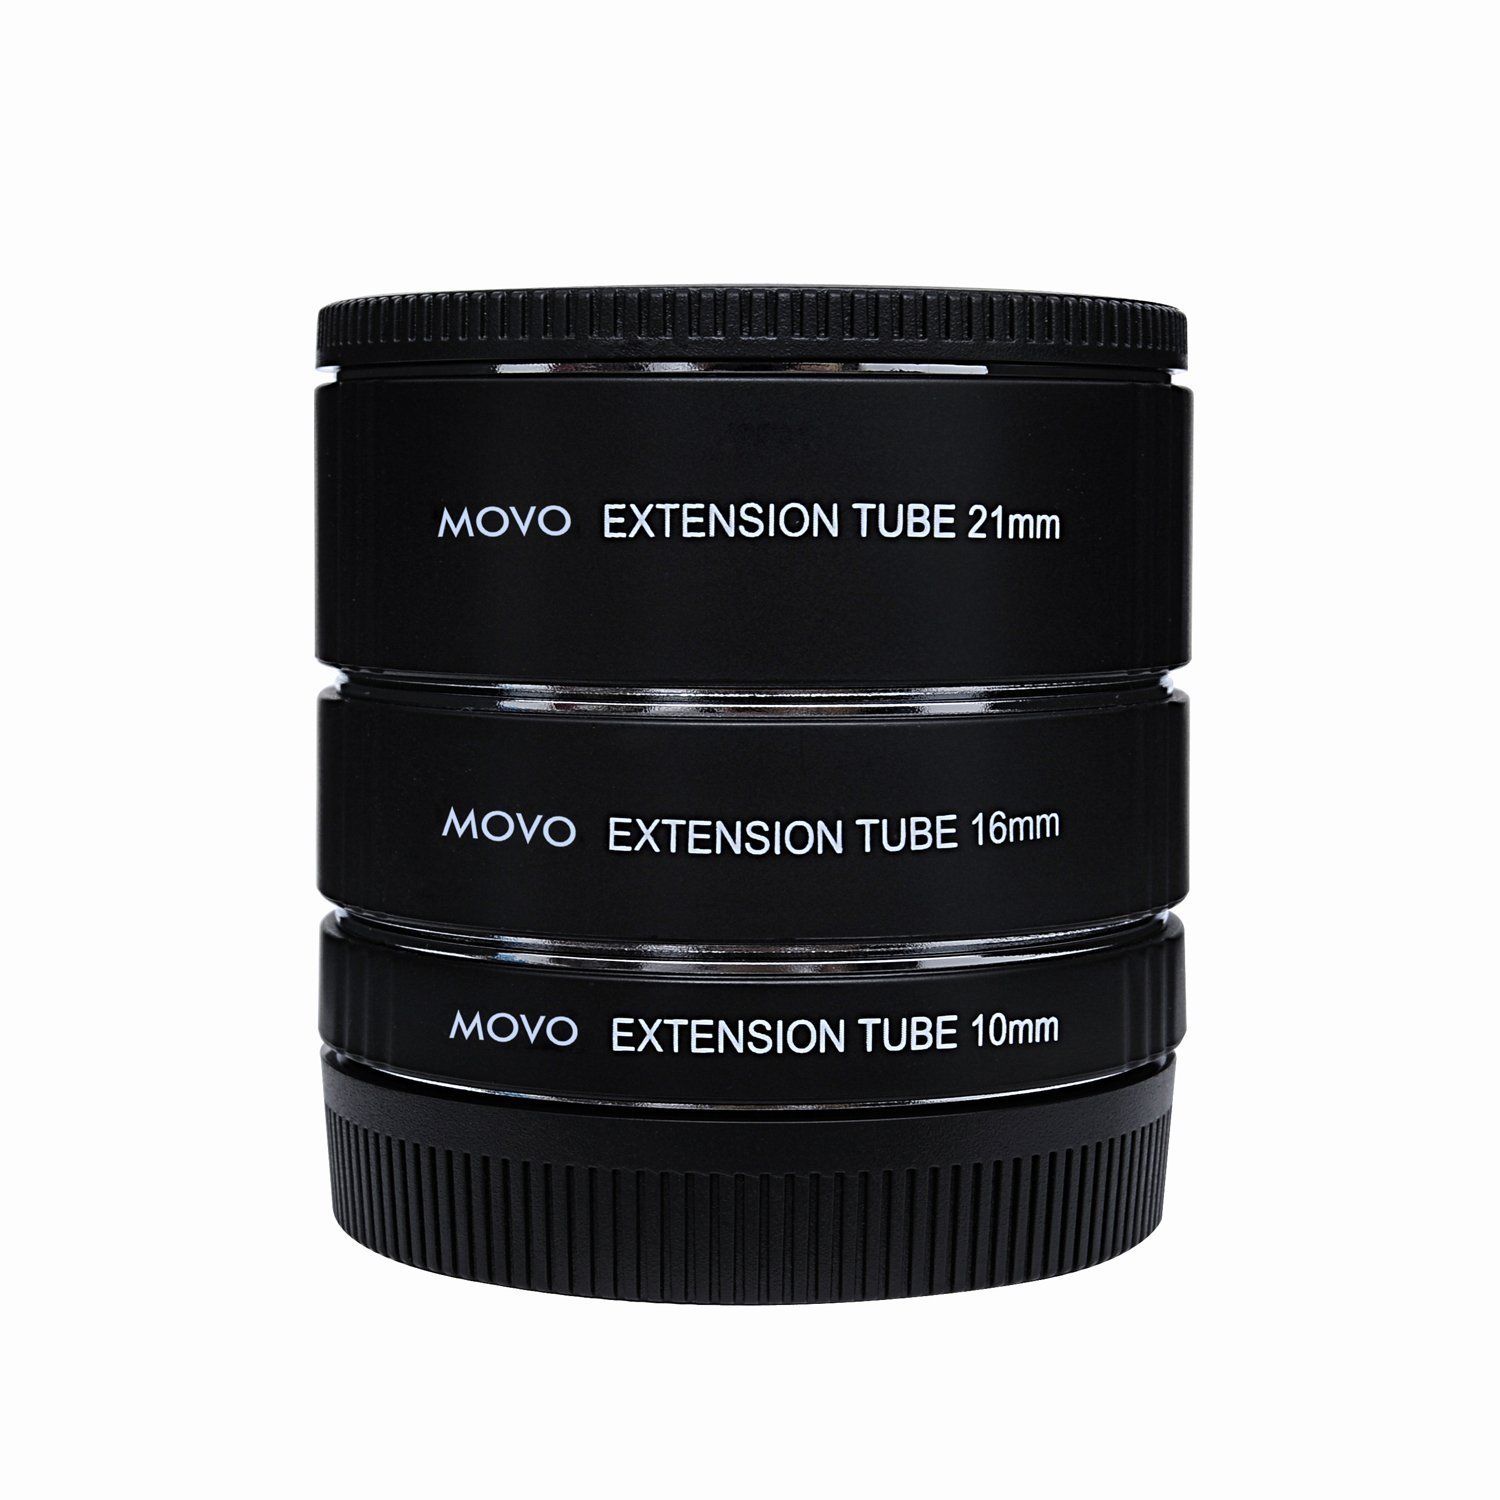 Movo AF Macro Extension Tubes for Olympus PEN & Panasonic Lumix Micro 4